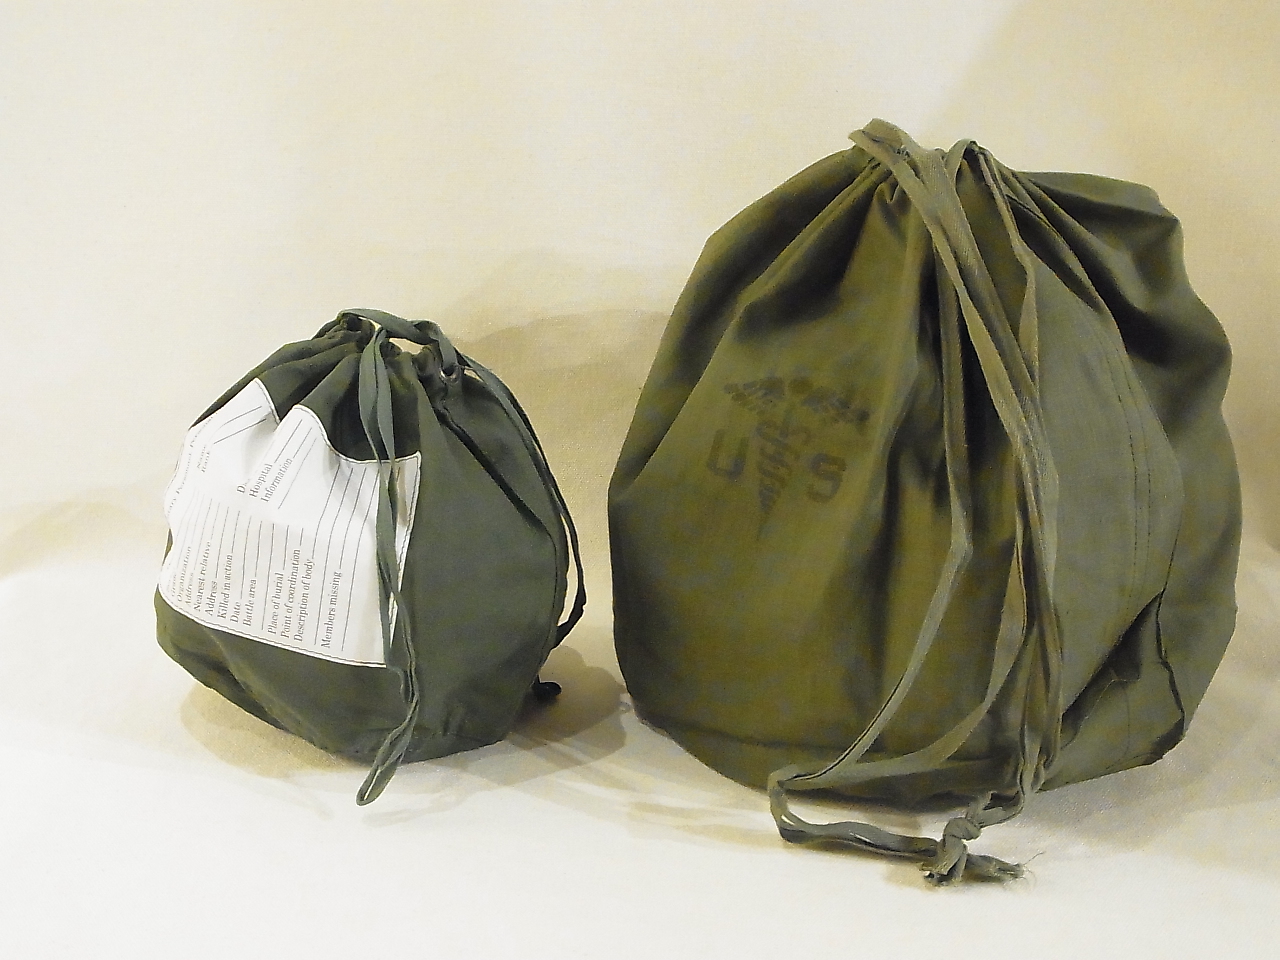 usmilitary-patient-effects-bag-20200228-3